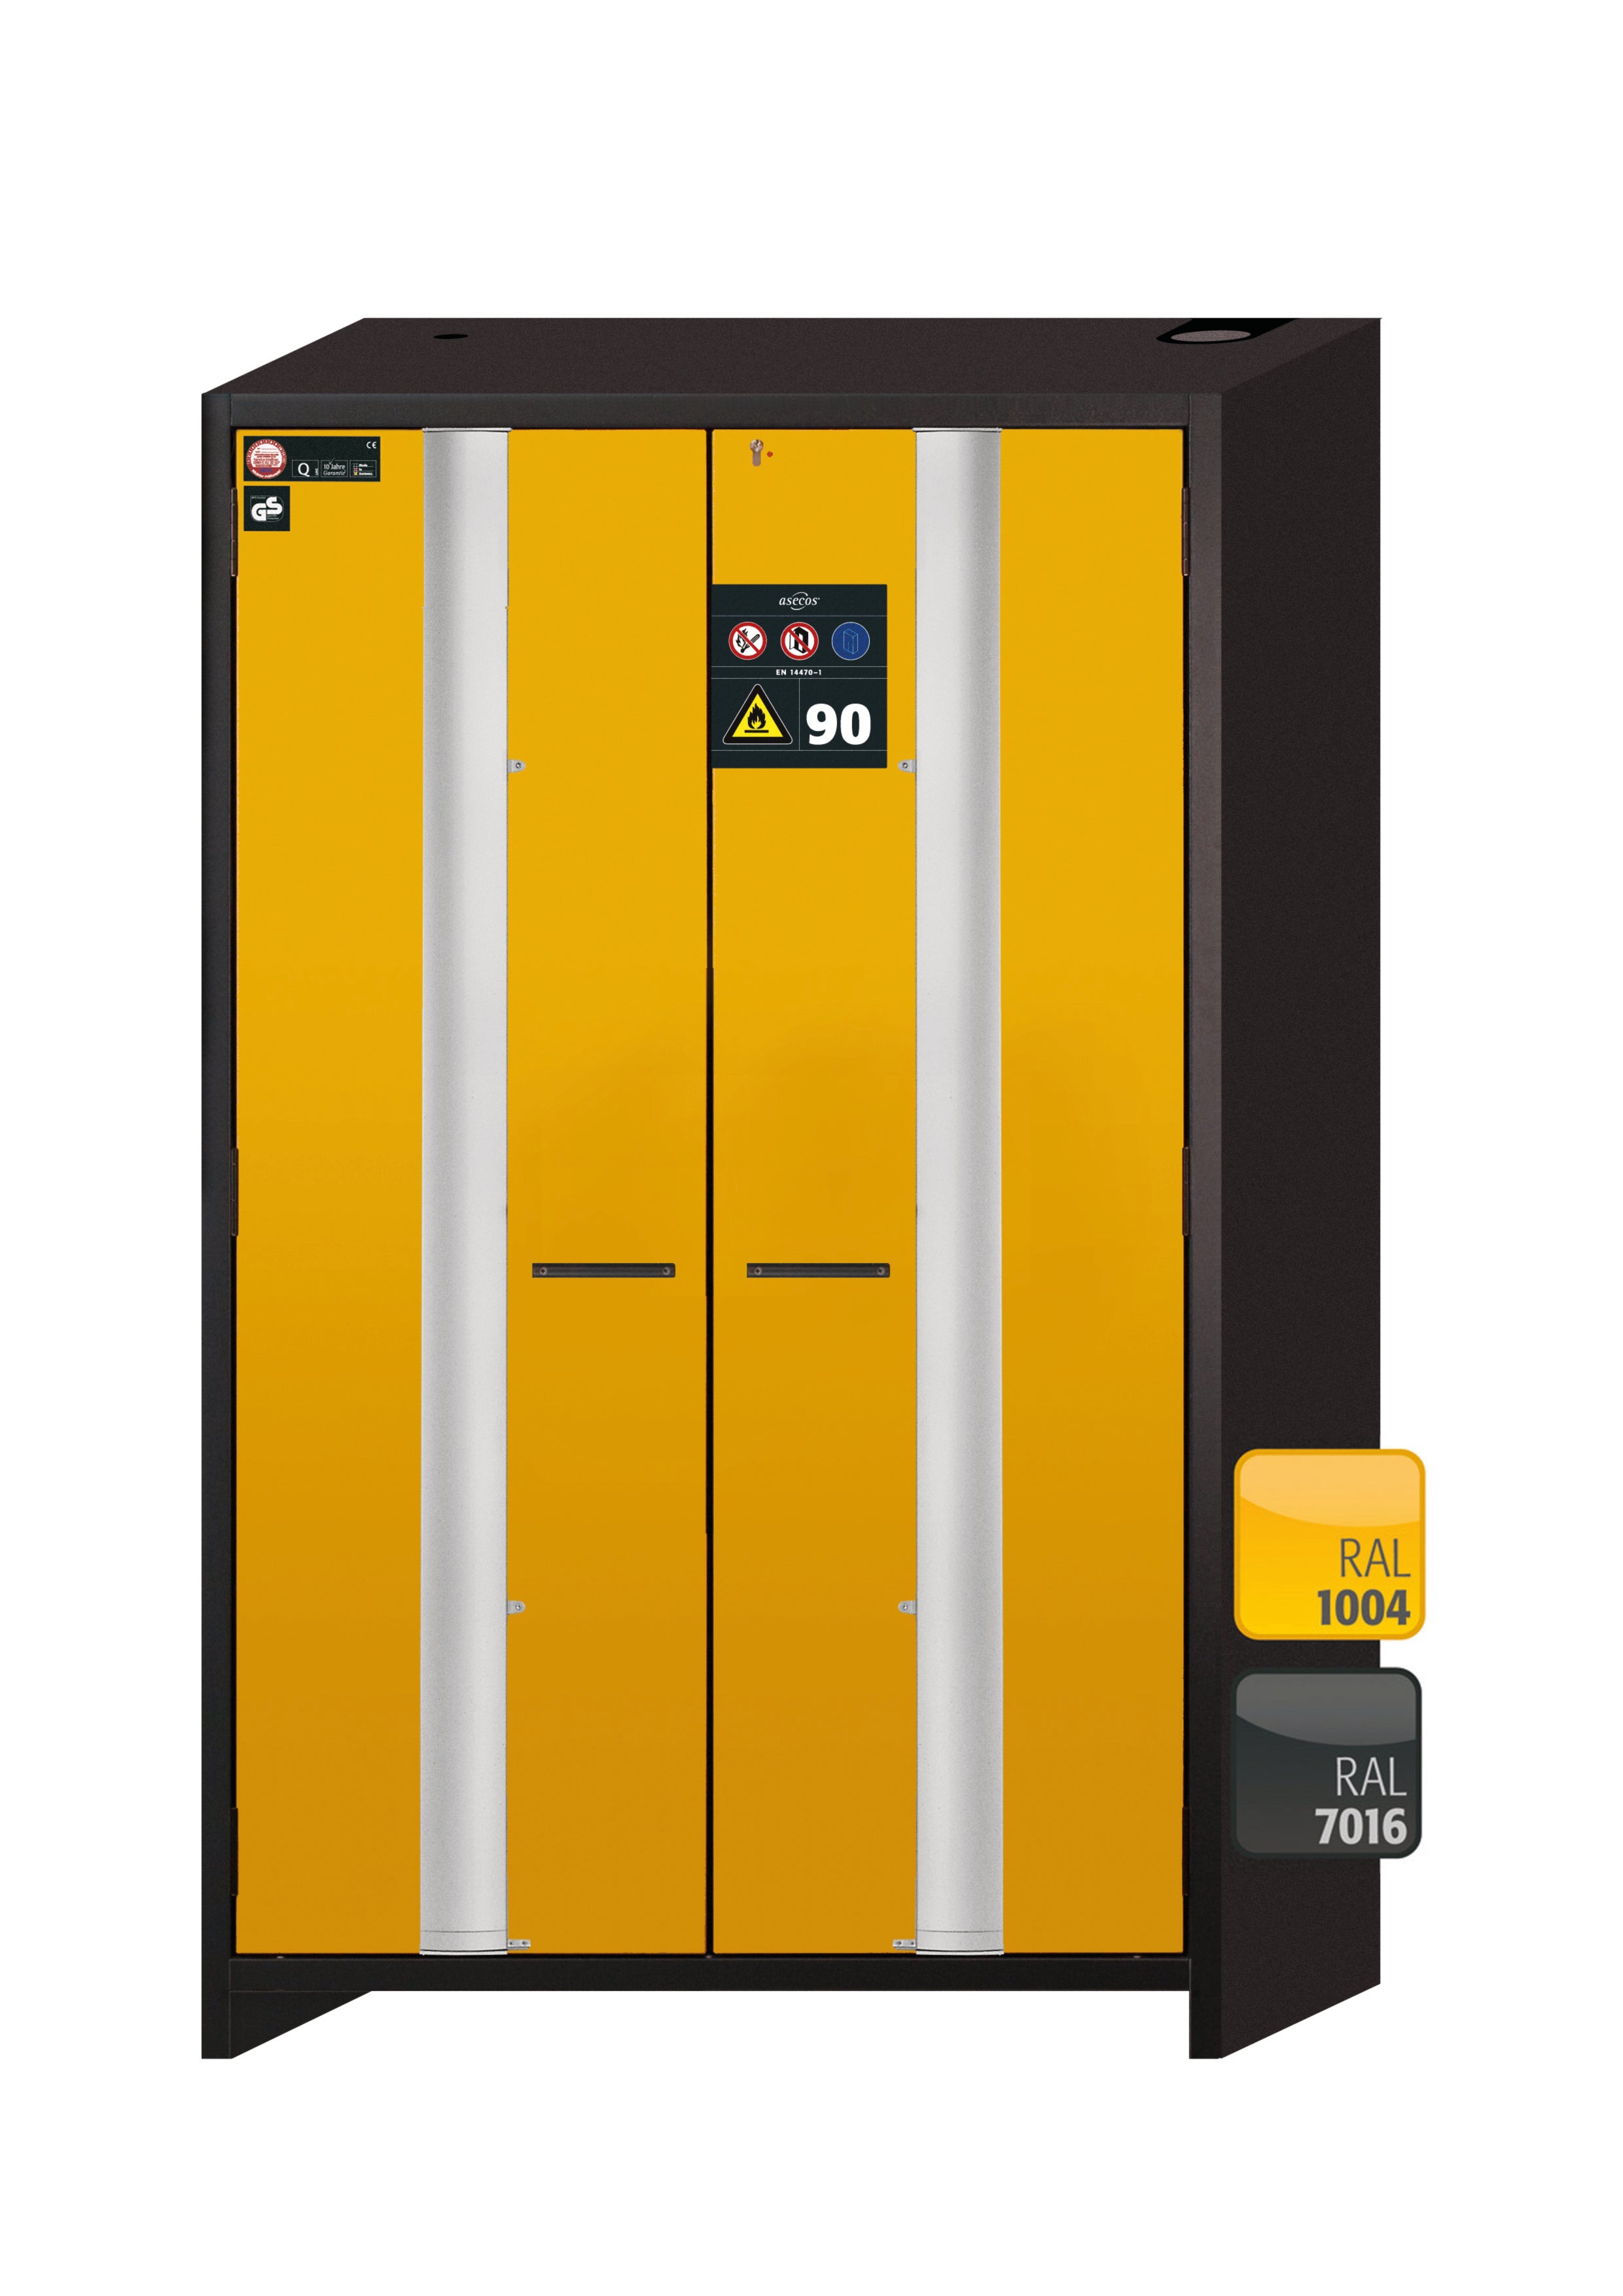 Type 90 safety cabinet Q-PHOENIX-90 model Q90.195.120.FD in safety yellow RAL 1004 with 2x standard tray base (polypropylene)